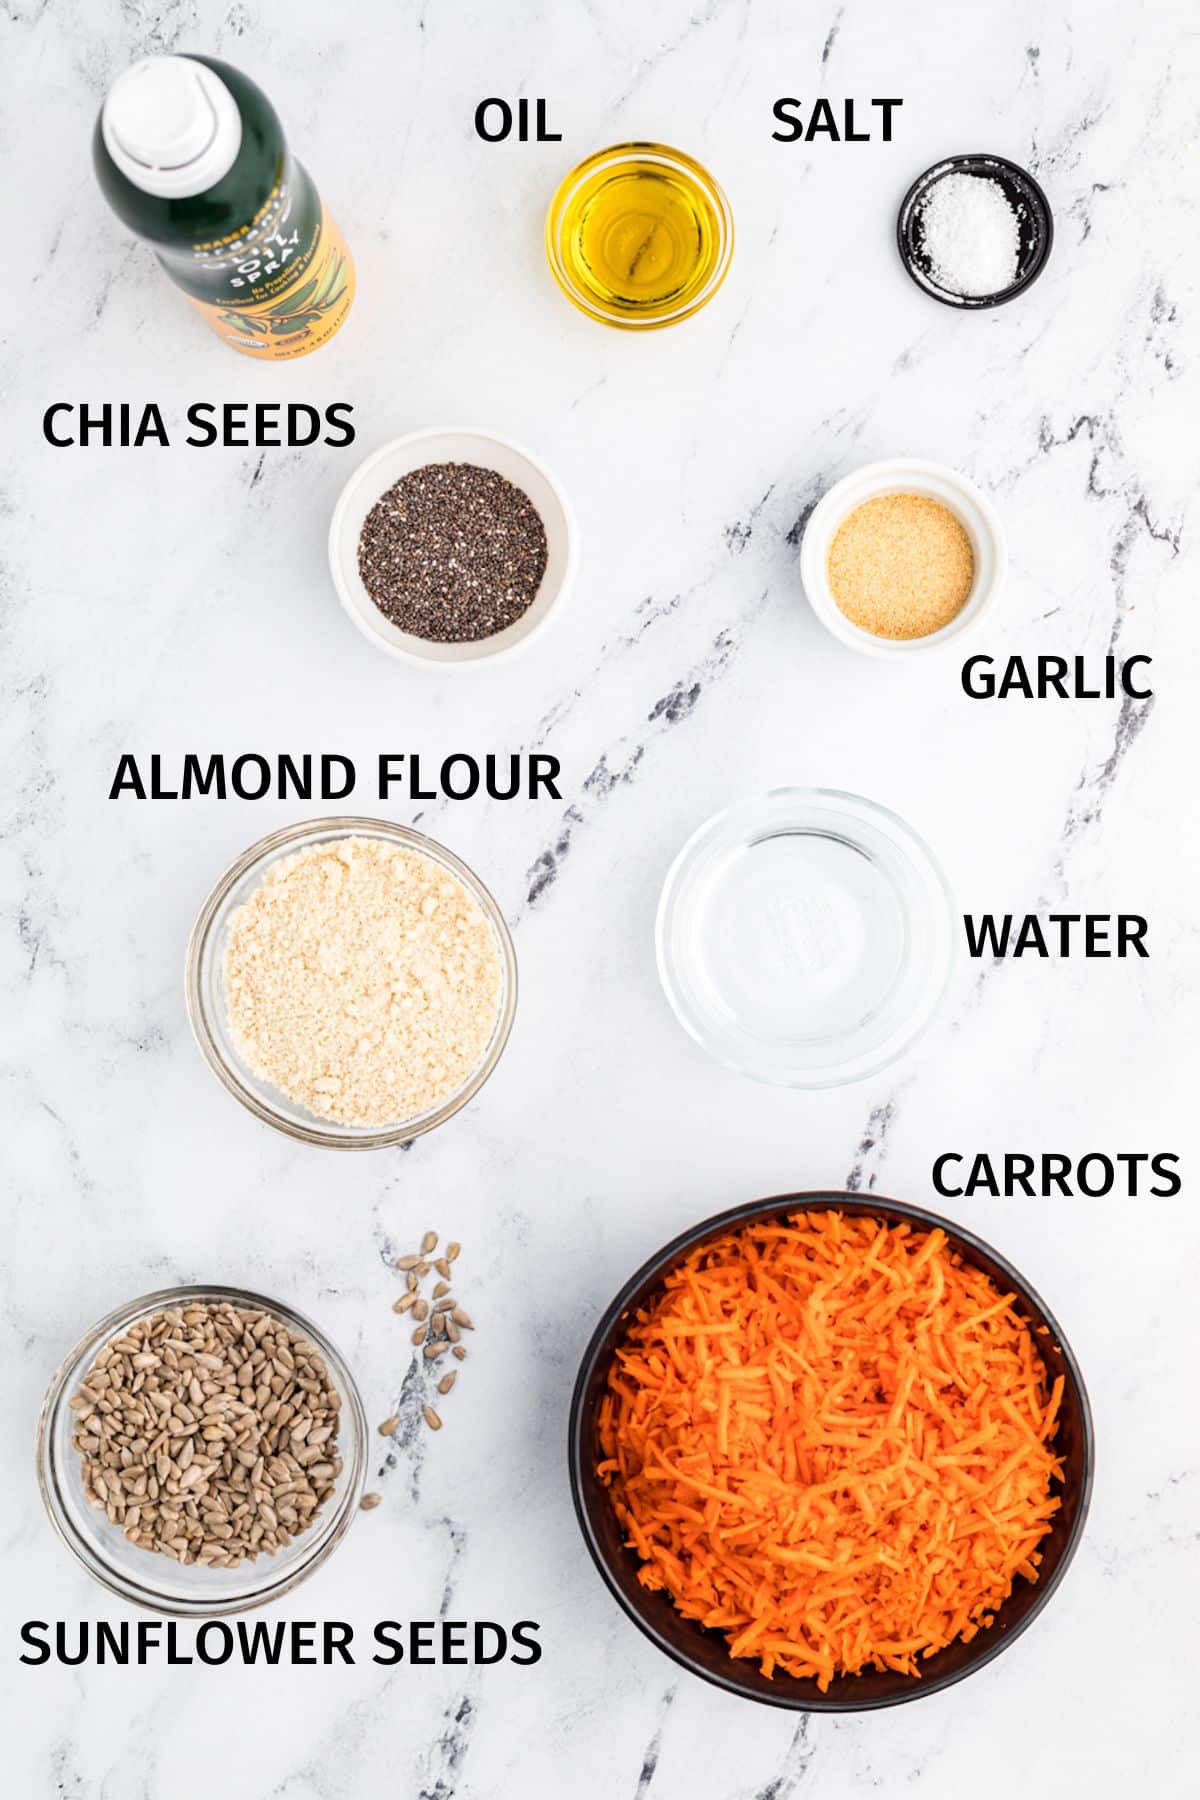 Ingredients to make carrot crackers in small bowls on a white surface.